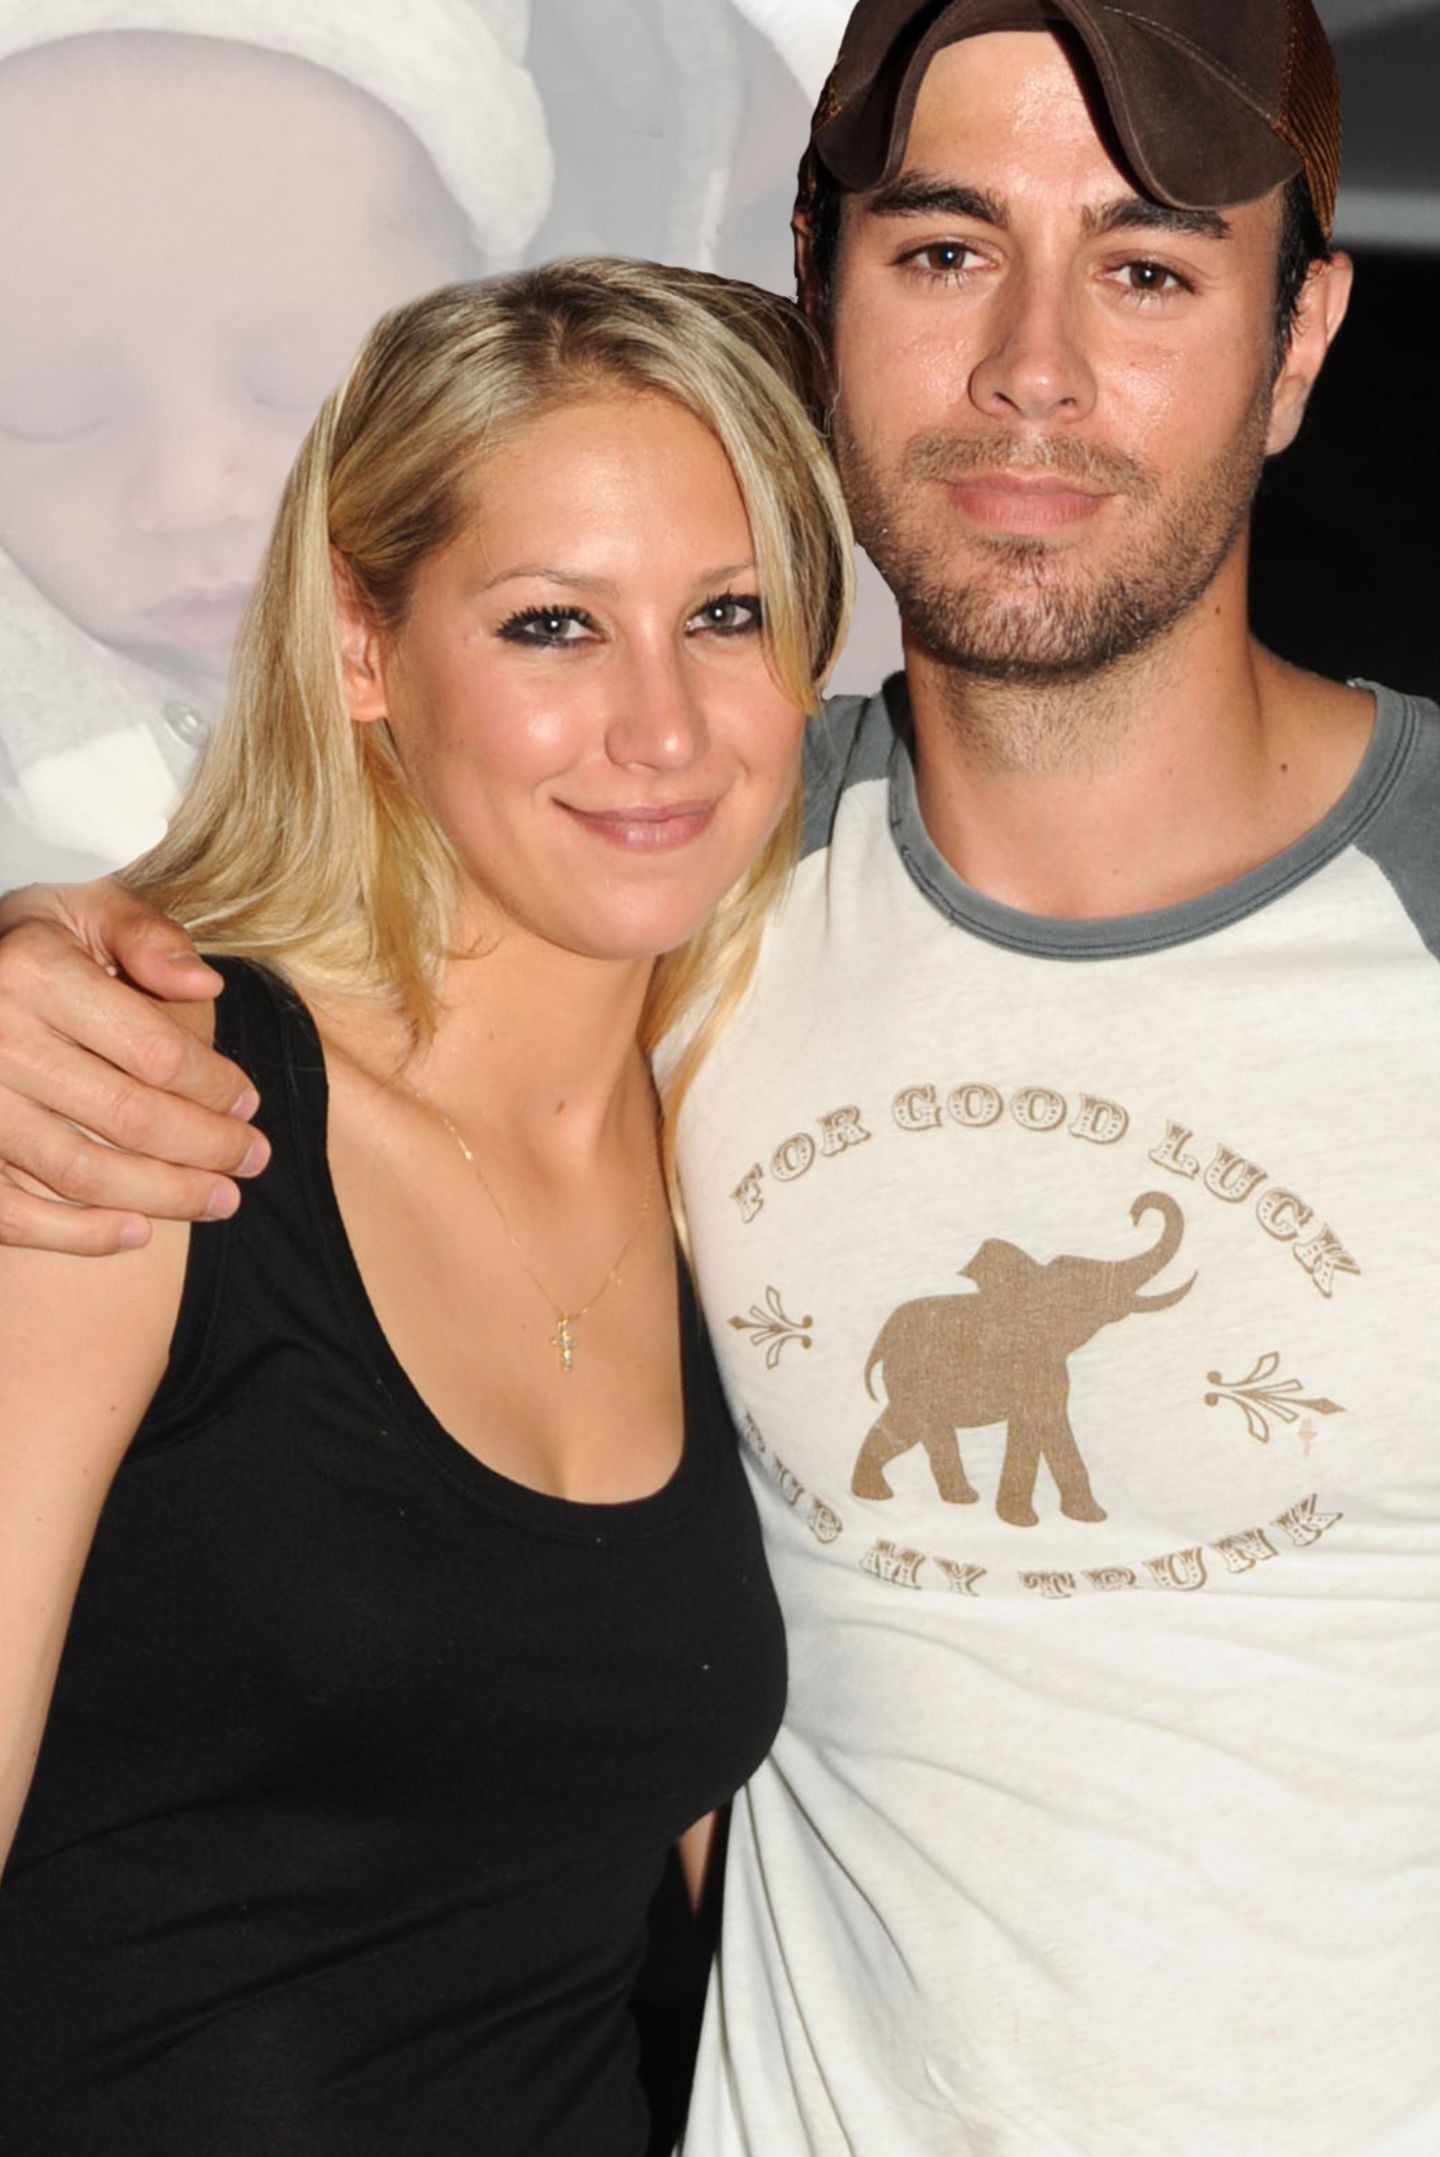 Enrique Iglesias and Anna Kournikova: The couple started dating in 2001 after meeting on the set of his “Escape” music video. 1440x2160 HD Wallpaper.